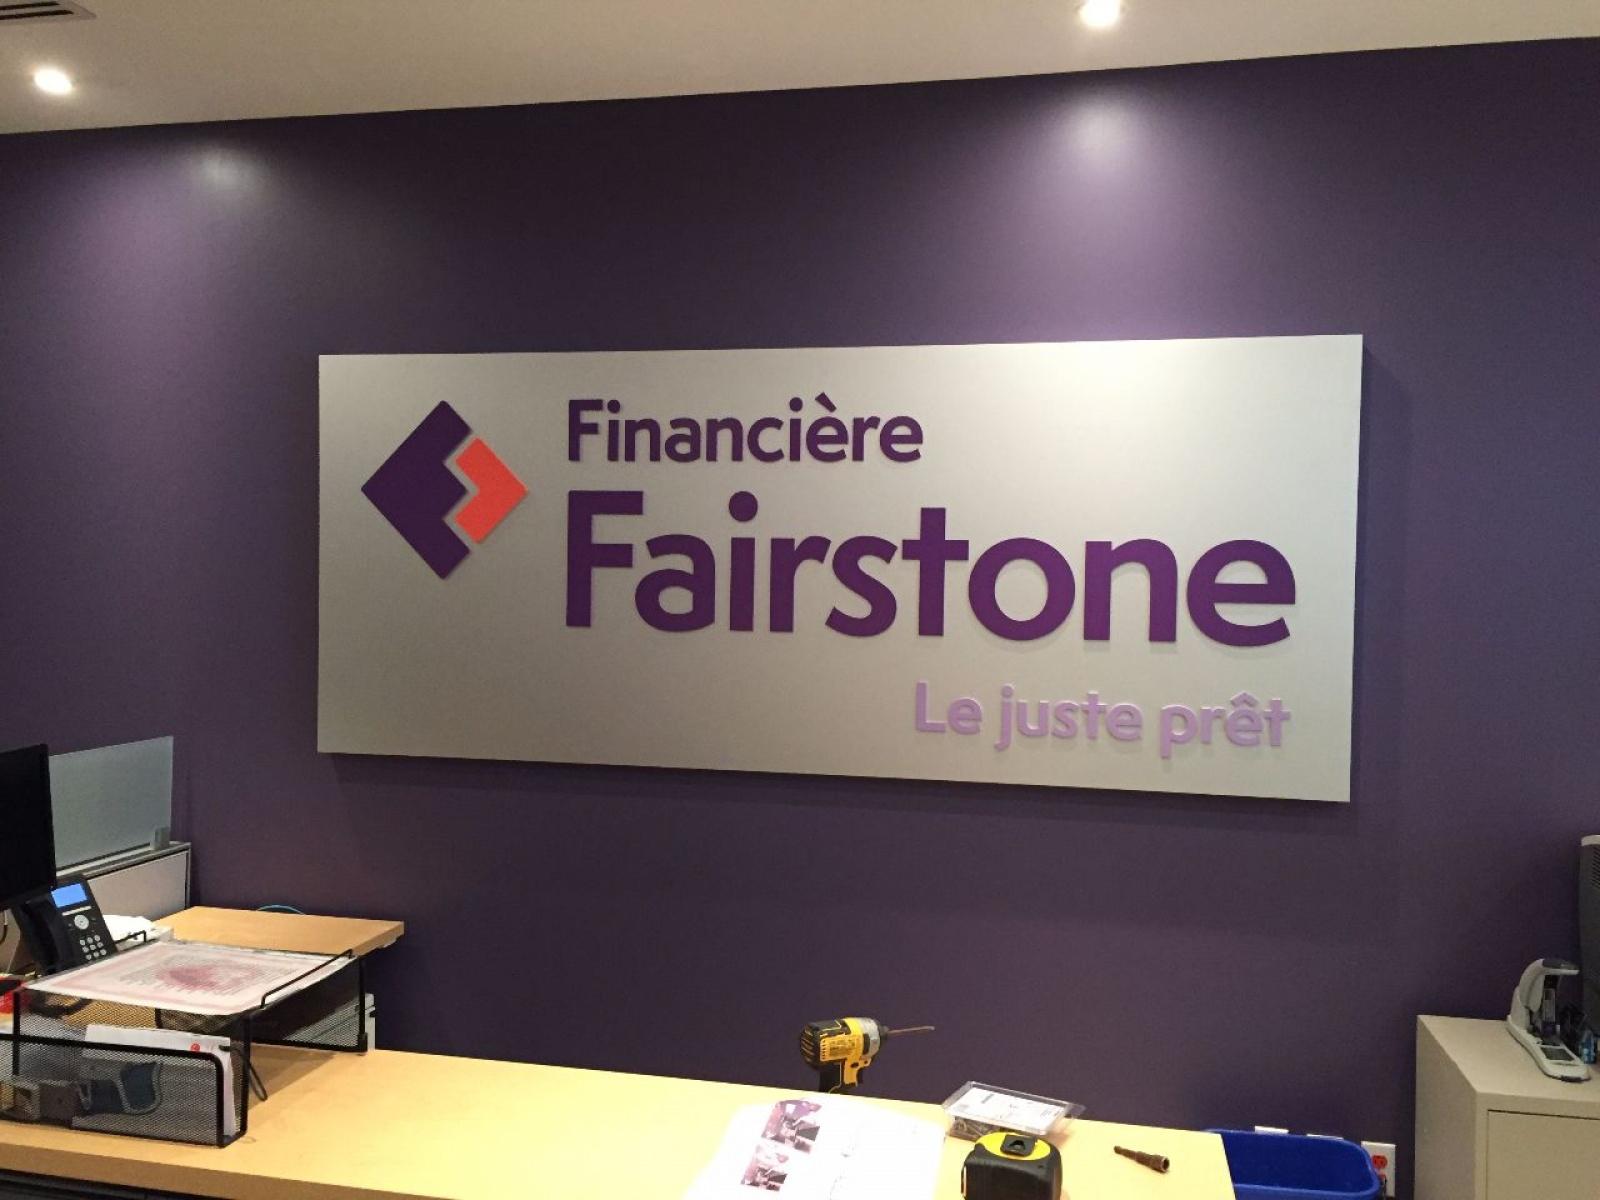 Fairstone sign, french